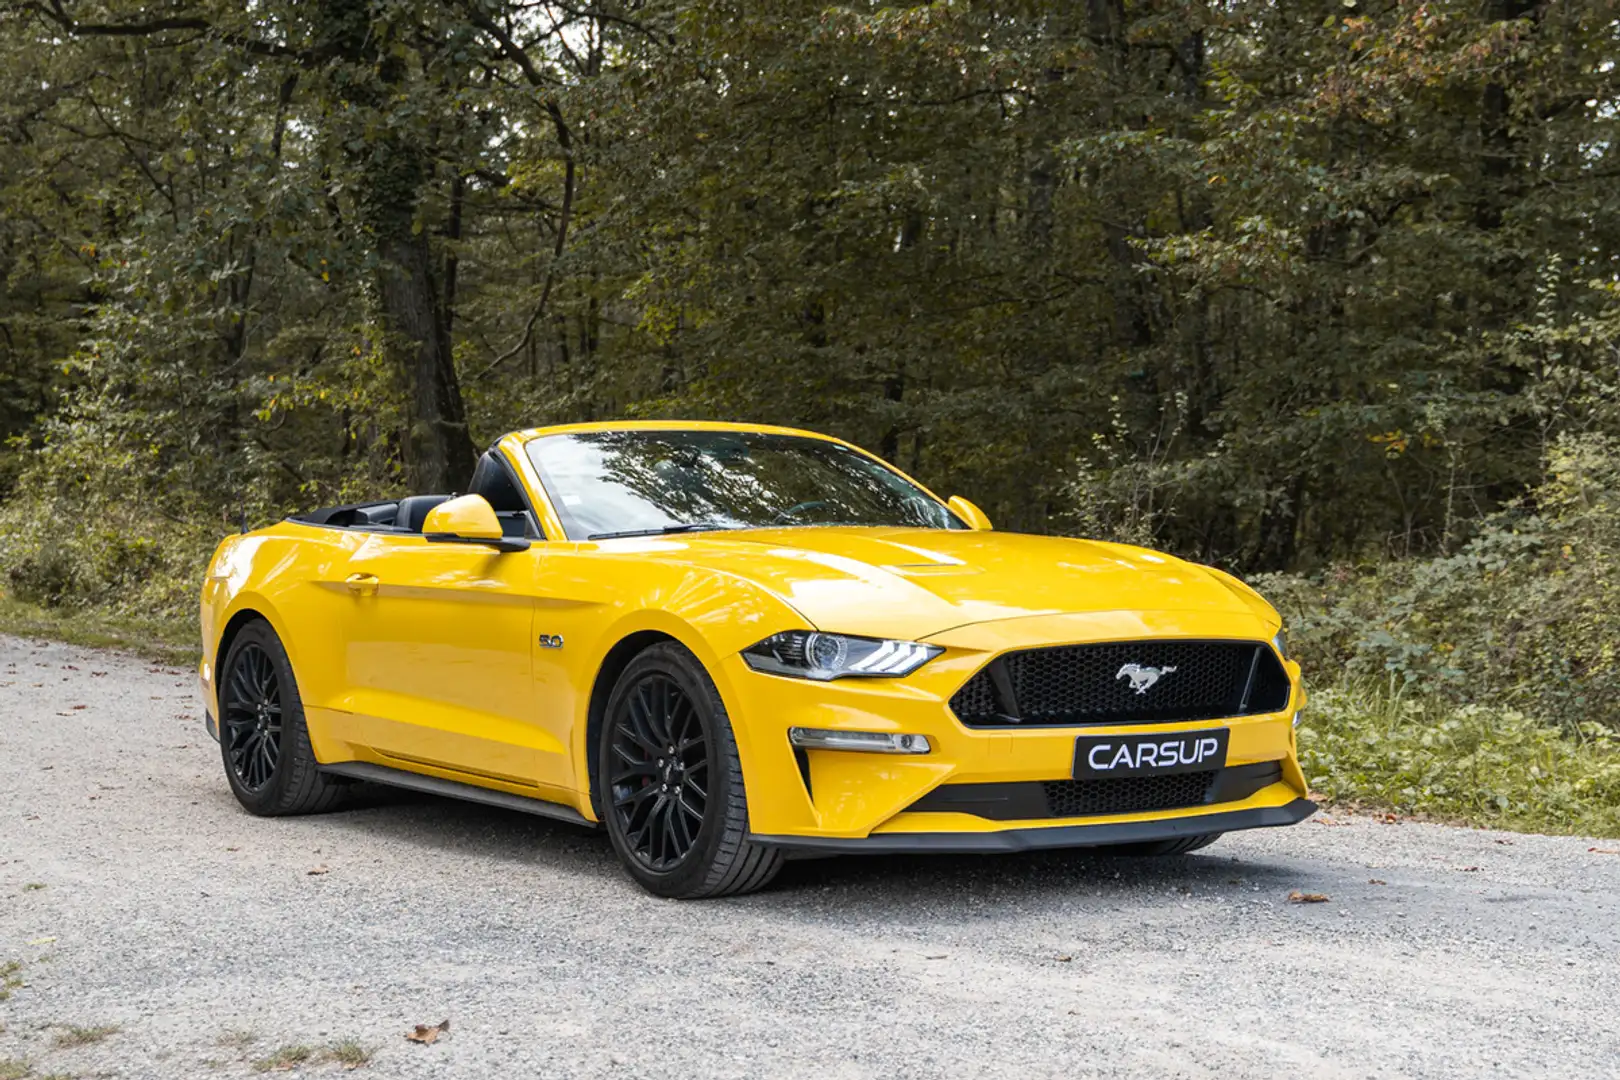 Ford Mustang Cabriolet V8 5.0 450 ch - 12 900km - 2018 - Immat  Jaune - 1